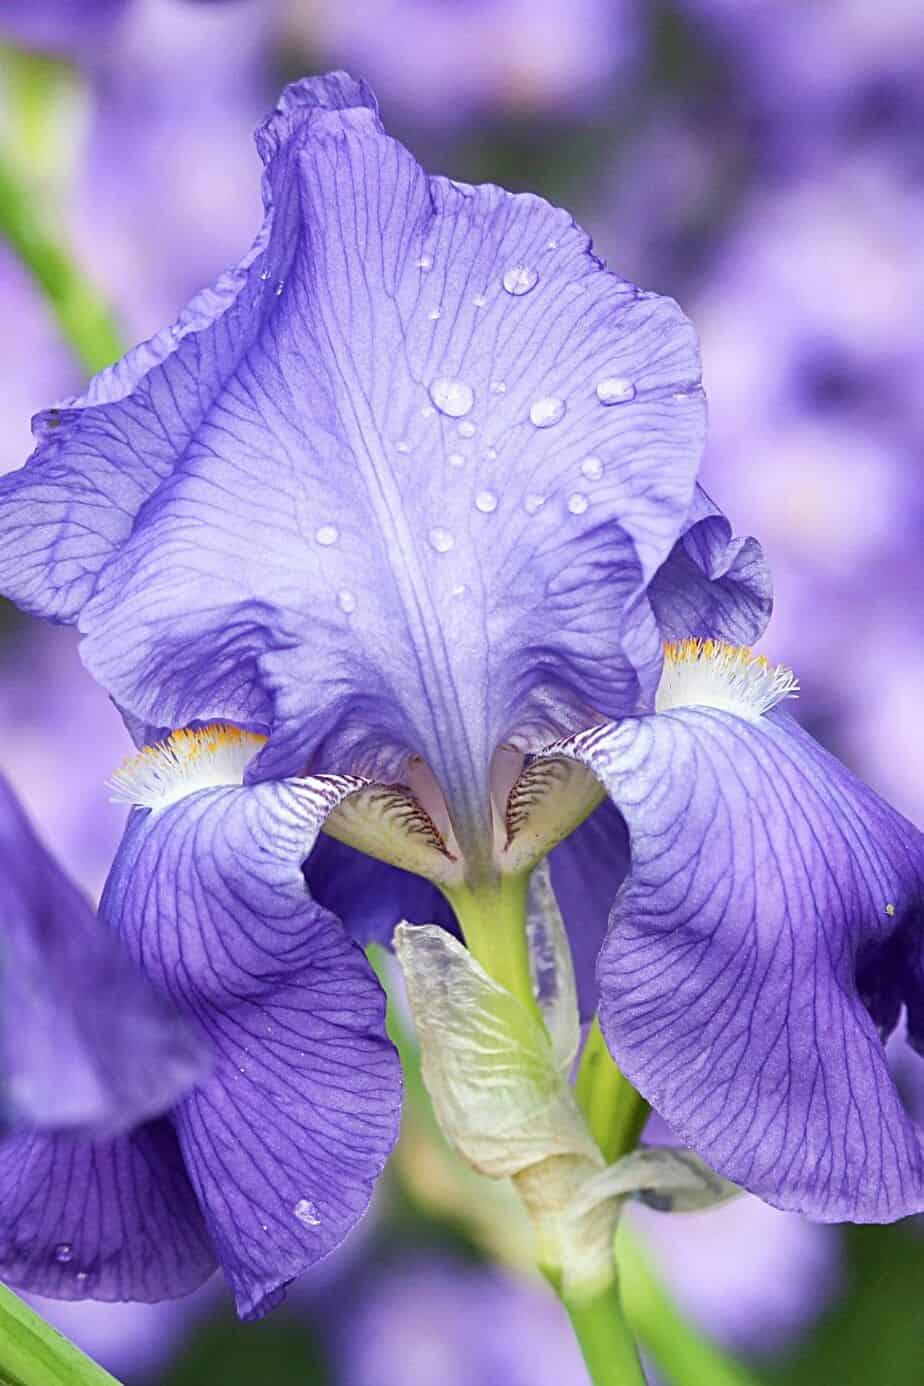 Iris, named after the Greek goddess, has a stunning color that's another great addition to your southeast-facing garden